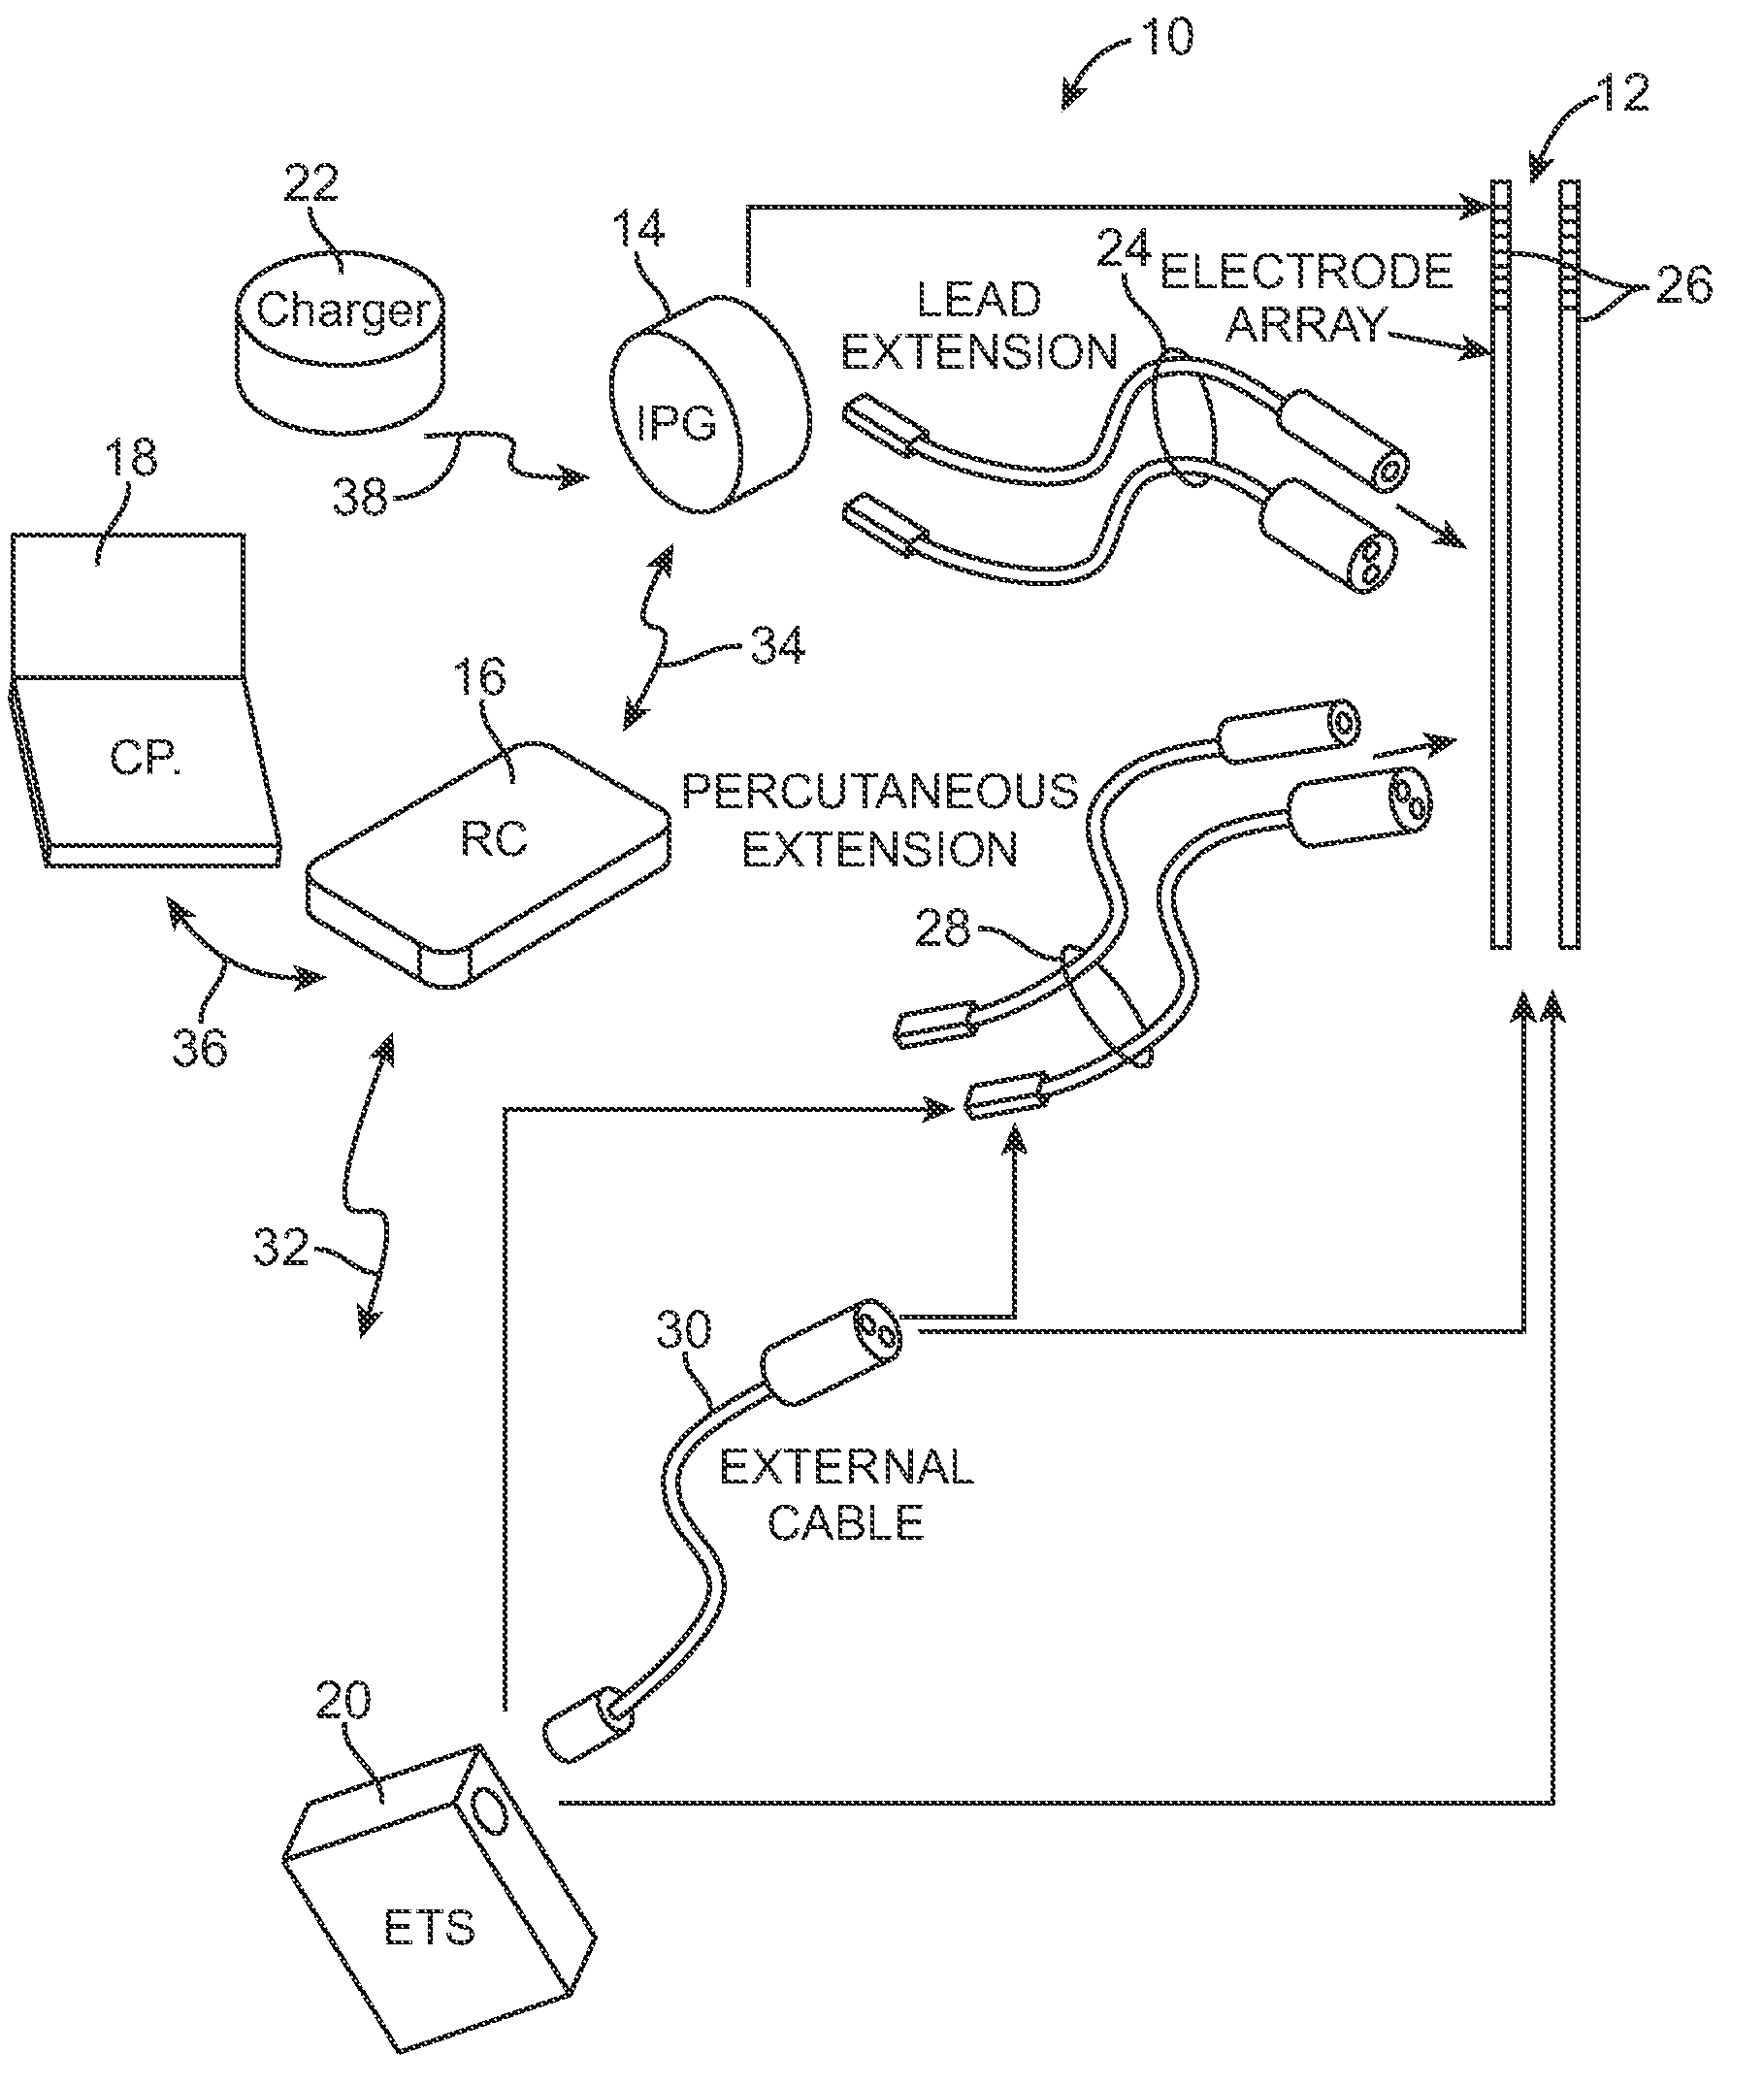 Methods to avoid frequency locking in a multi-channel neurostimulation system using pulse placement